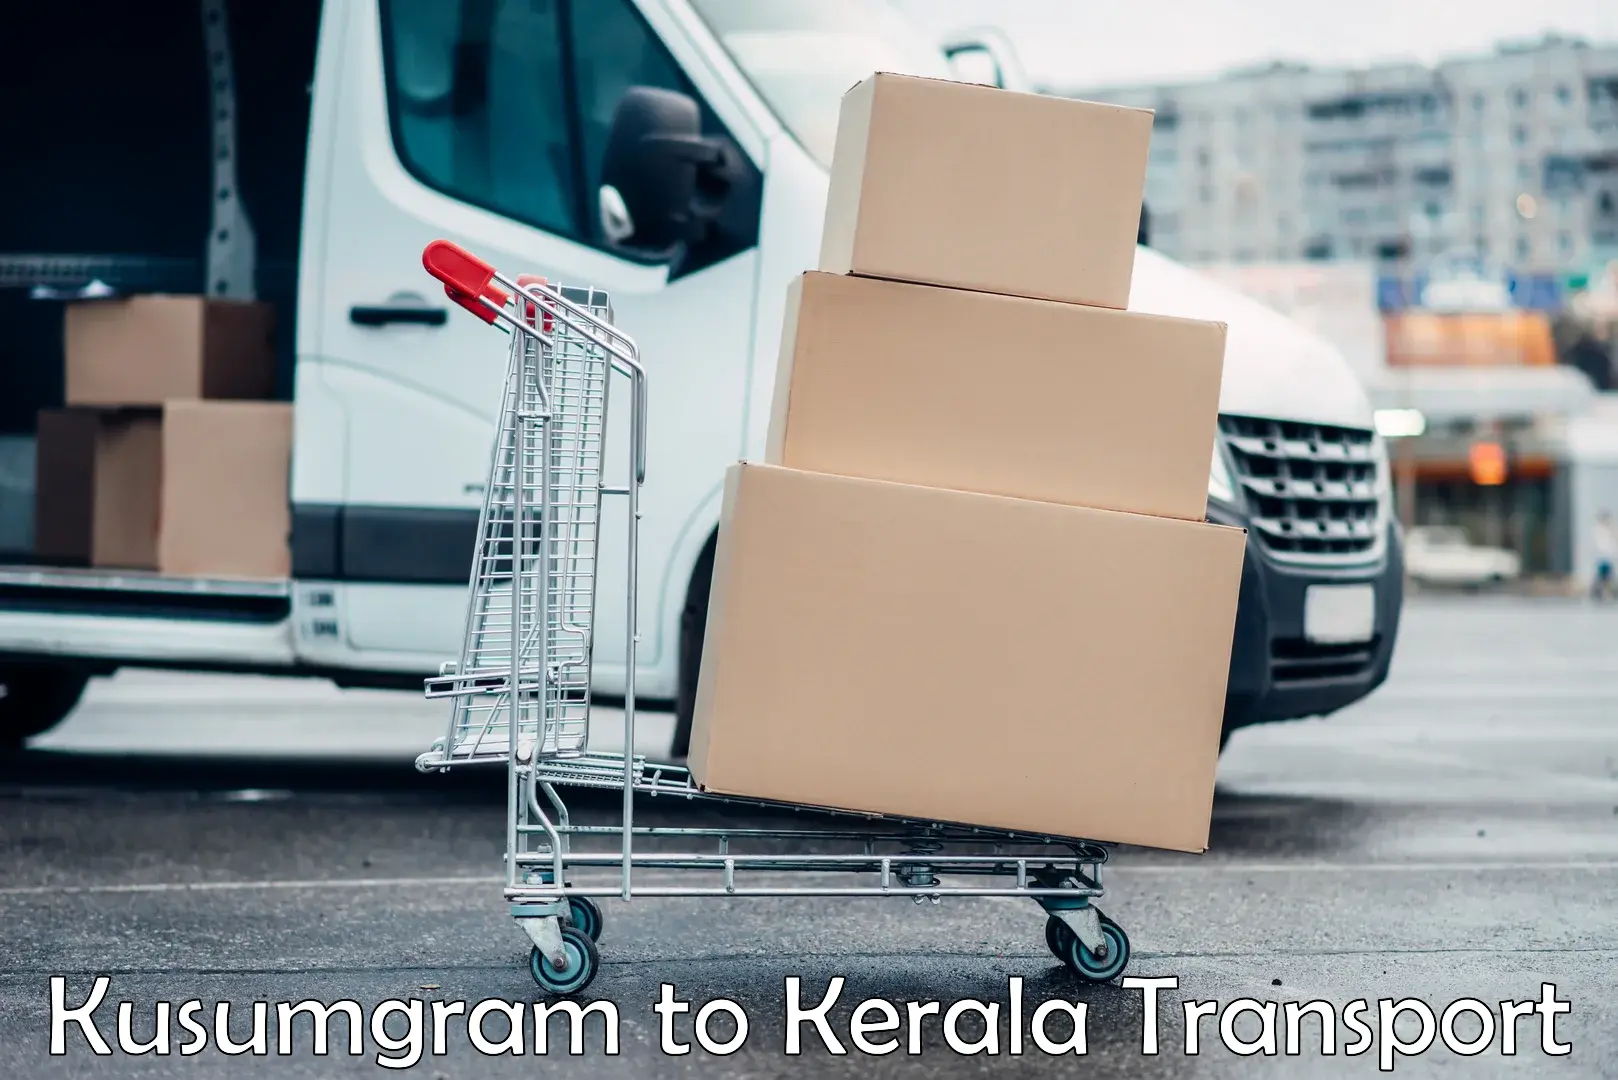 Container transportation services in Kusumgram to Wayanad